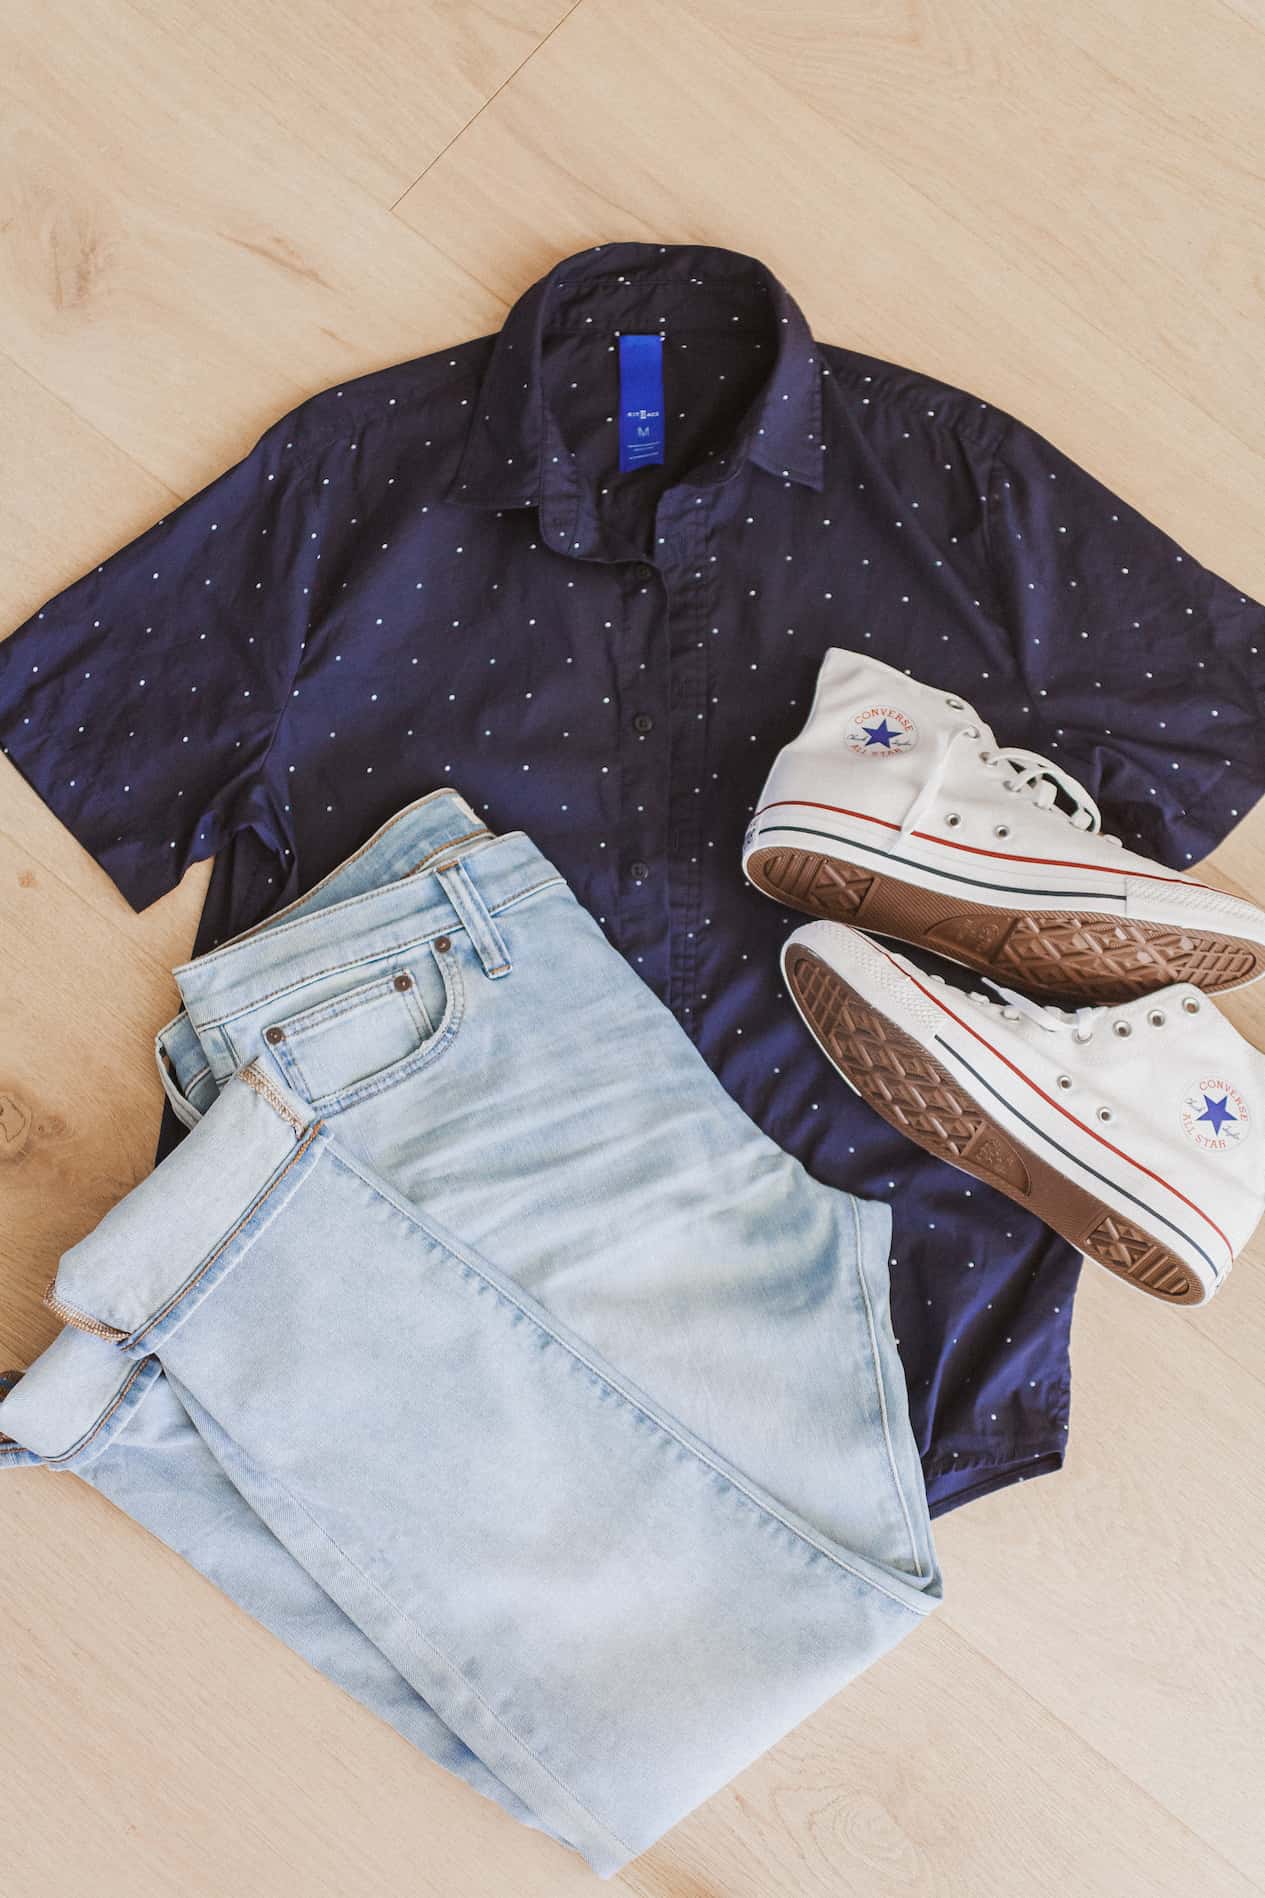 image of an outfit flat lay with a navy blue polka dot button up t-shirt, light blue jeans, and white Converse high top sneakers